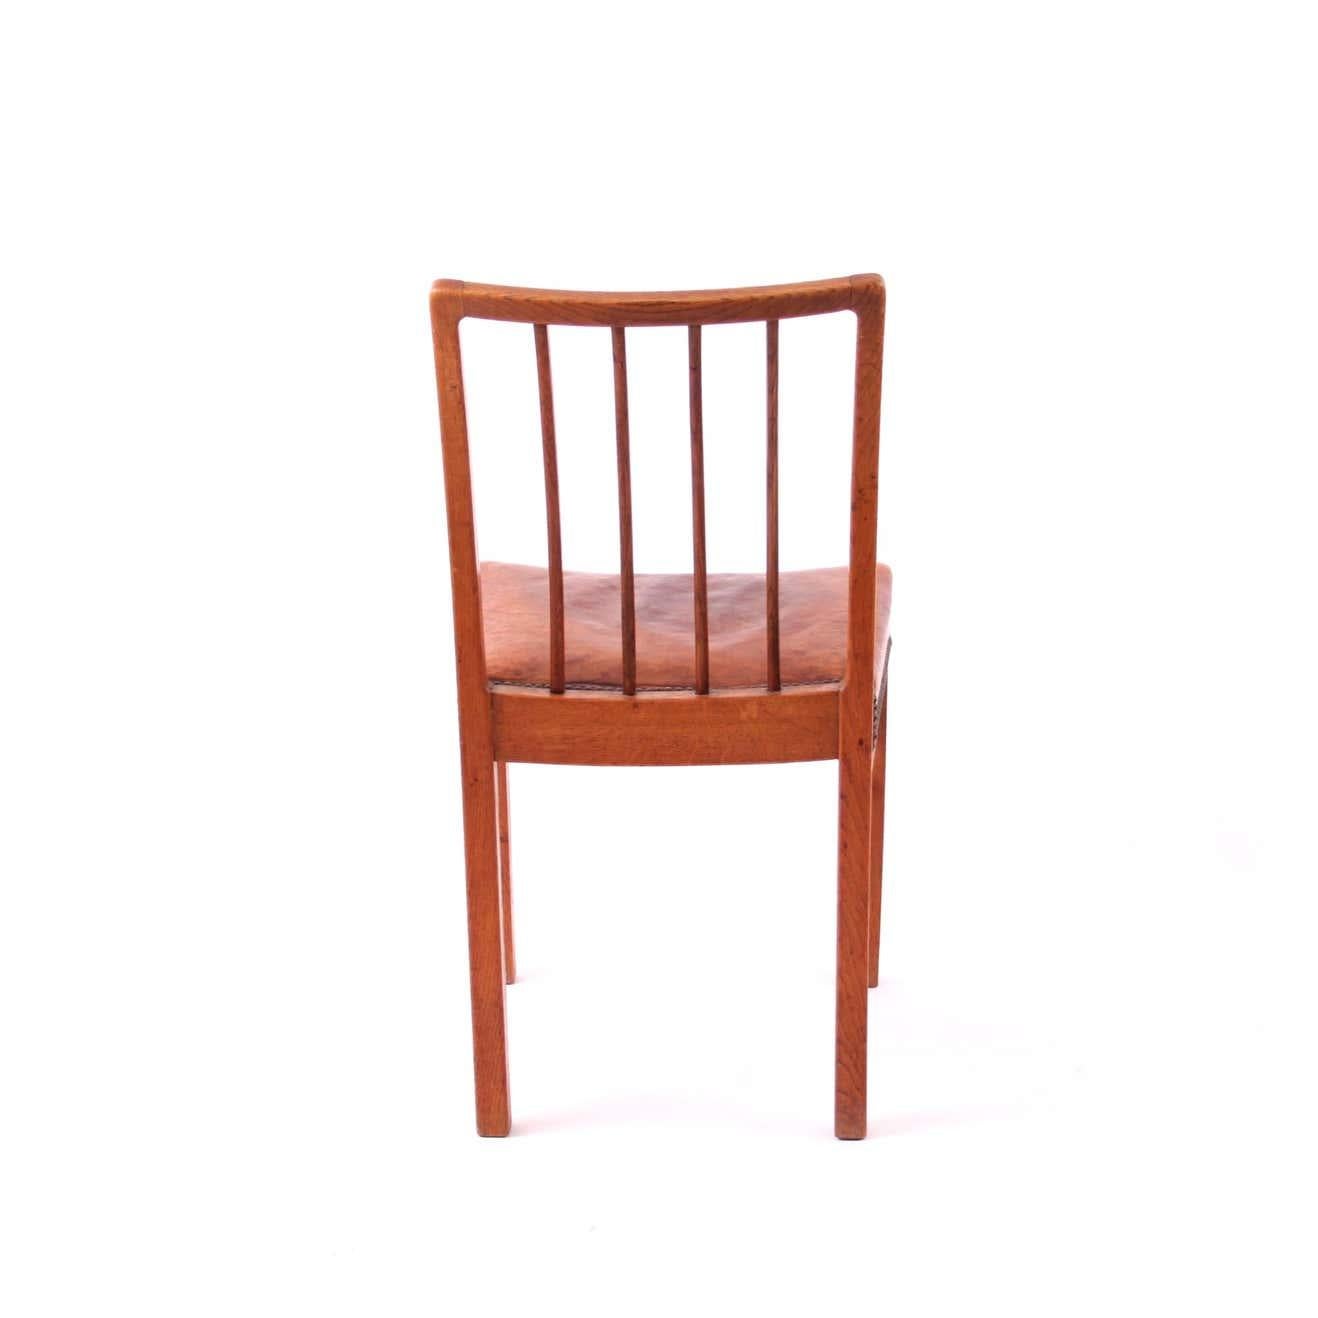 20th Century Jacob Kjaer set of 6 dining chairs Oak and original Niger leather, 1930's For Sale